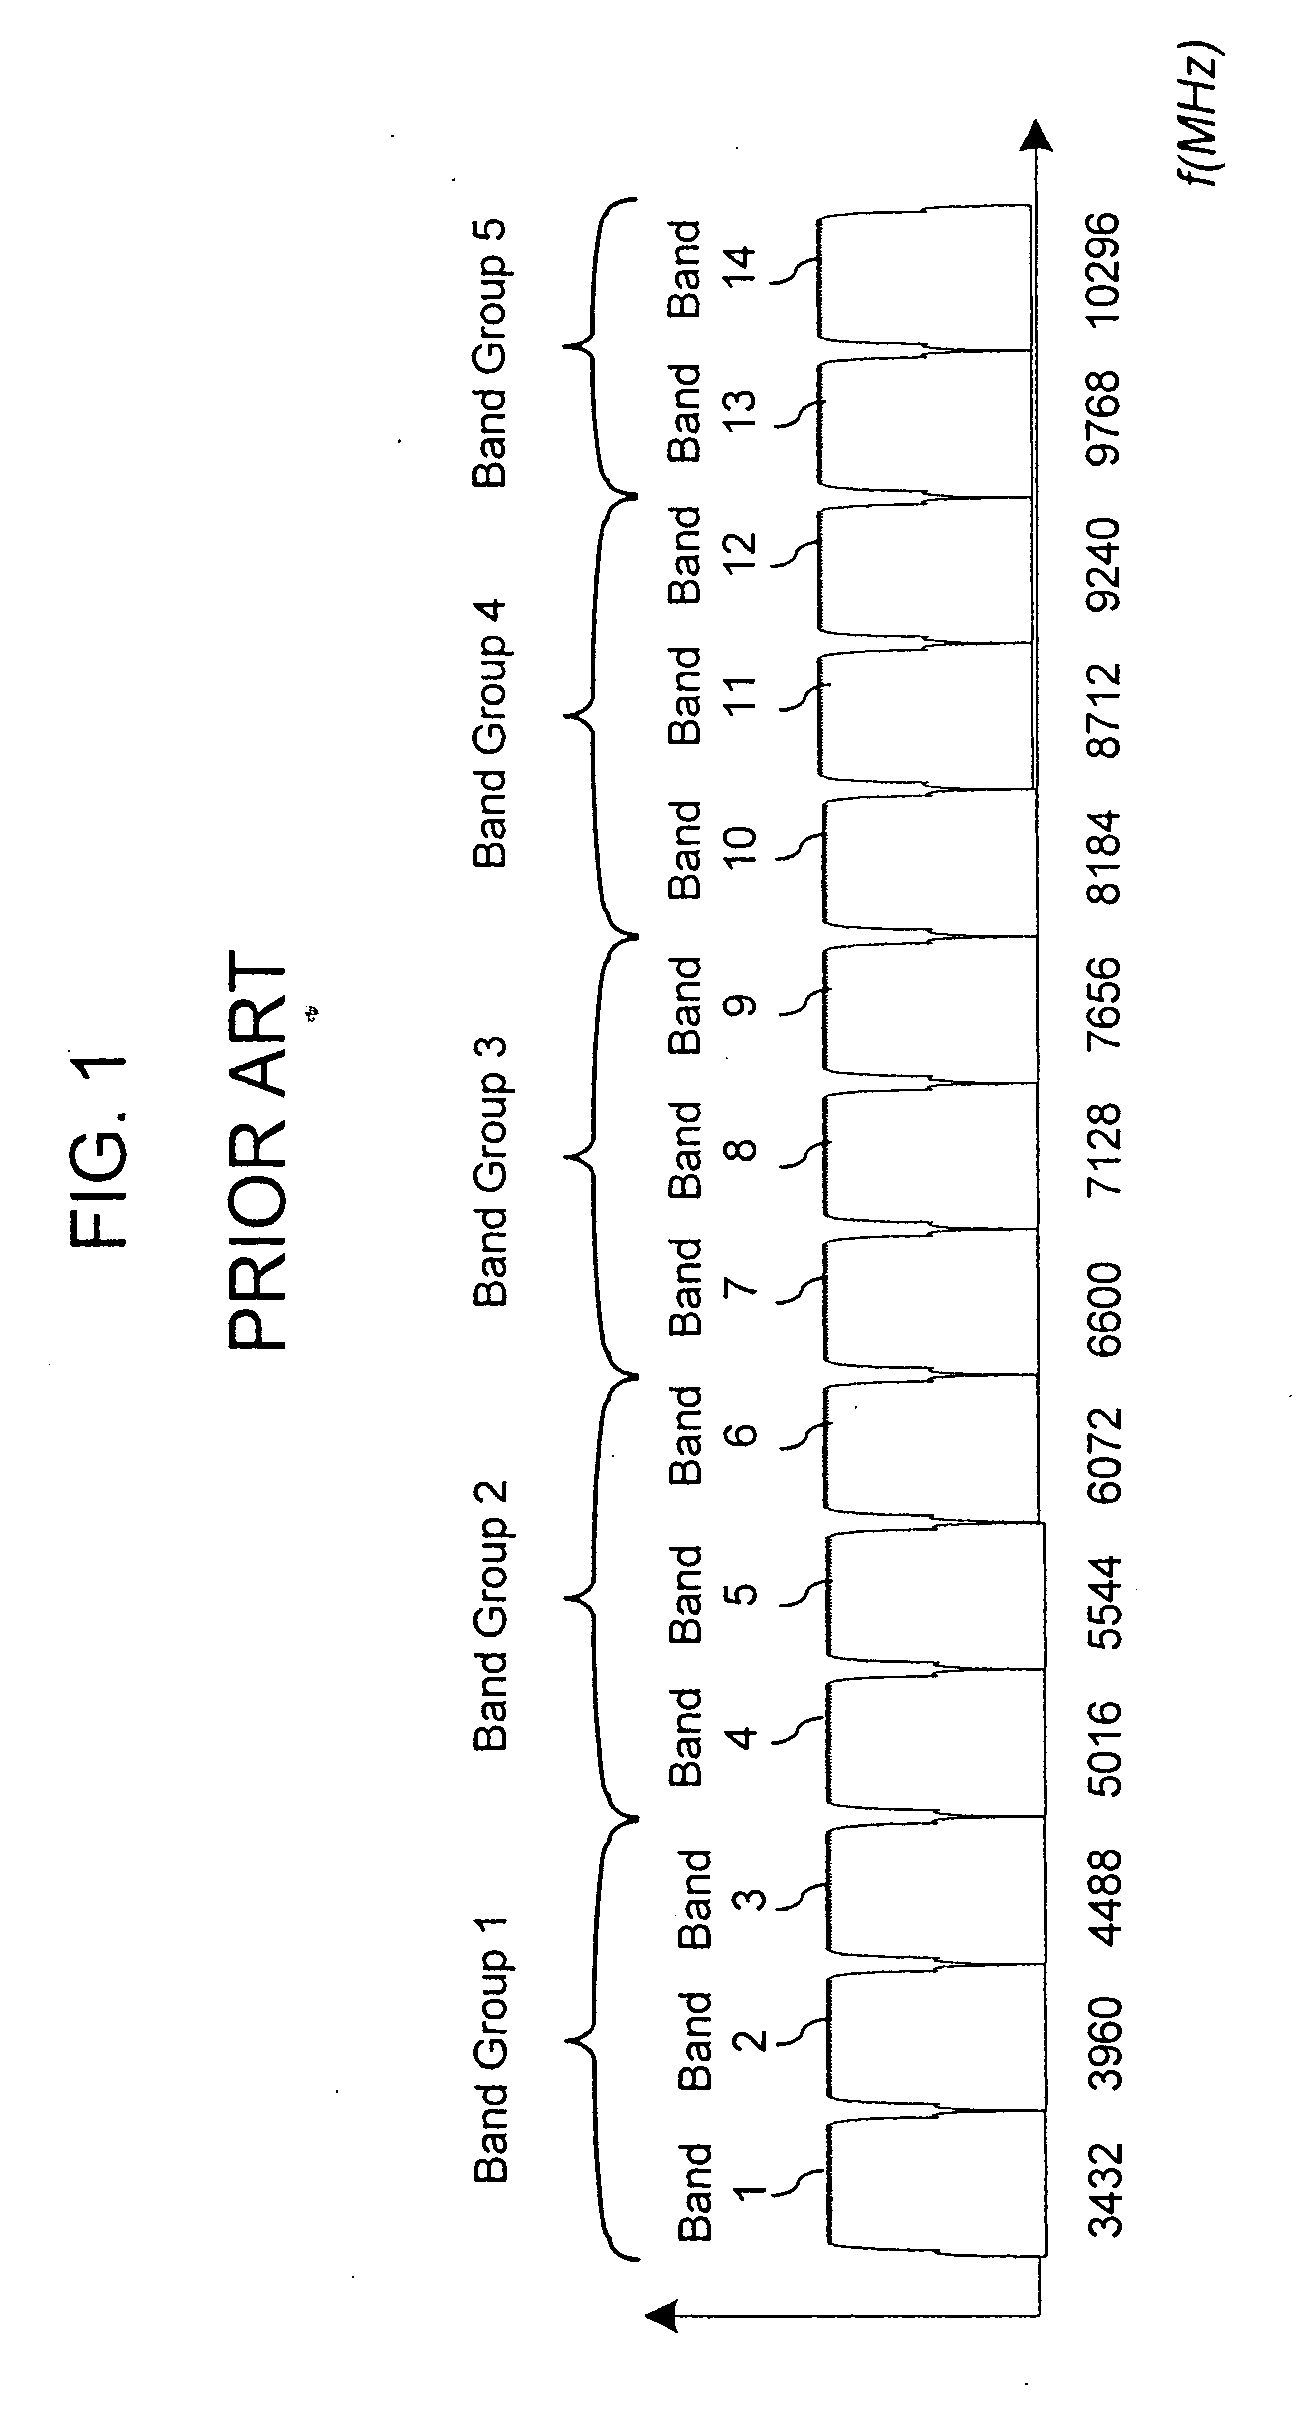 Method of band multiplexing to improve system capacity for a multi-band communication system